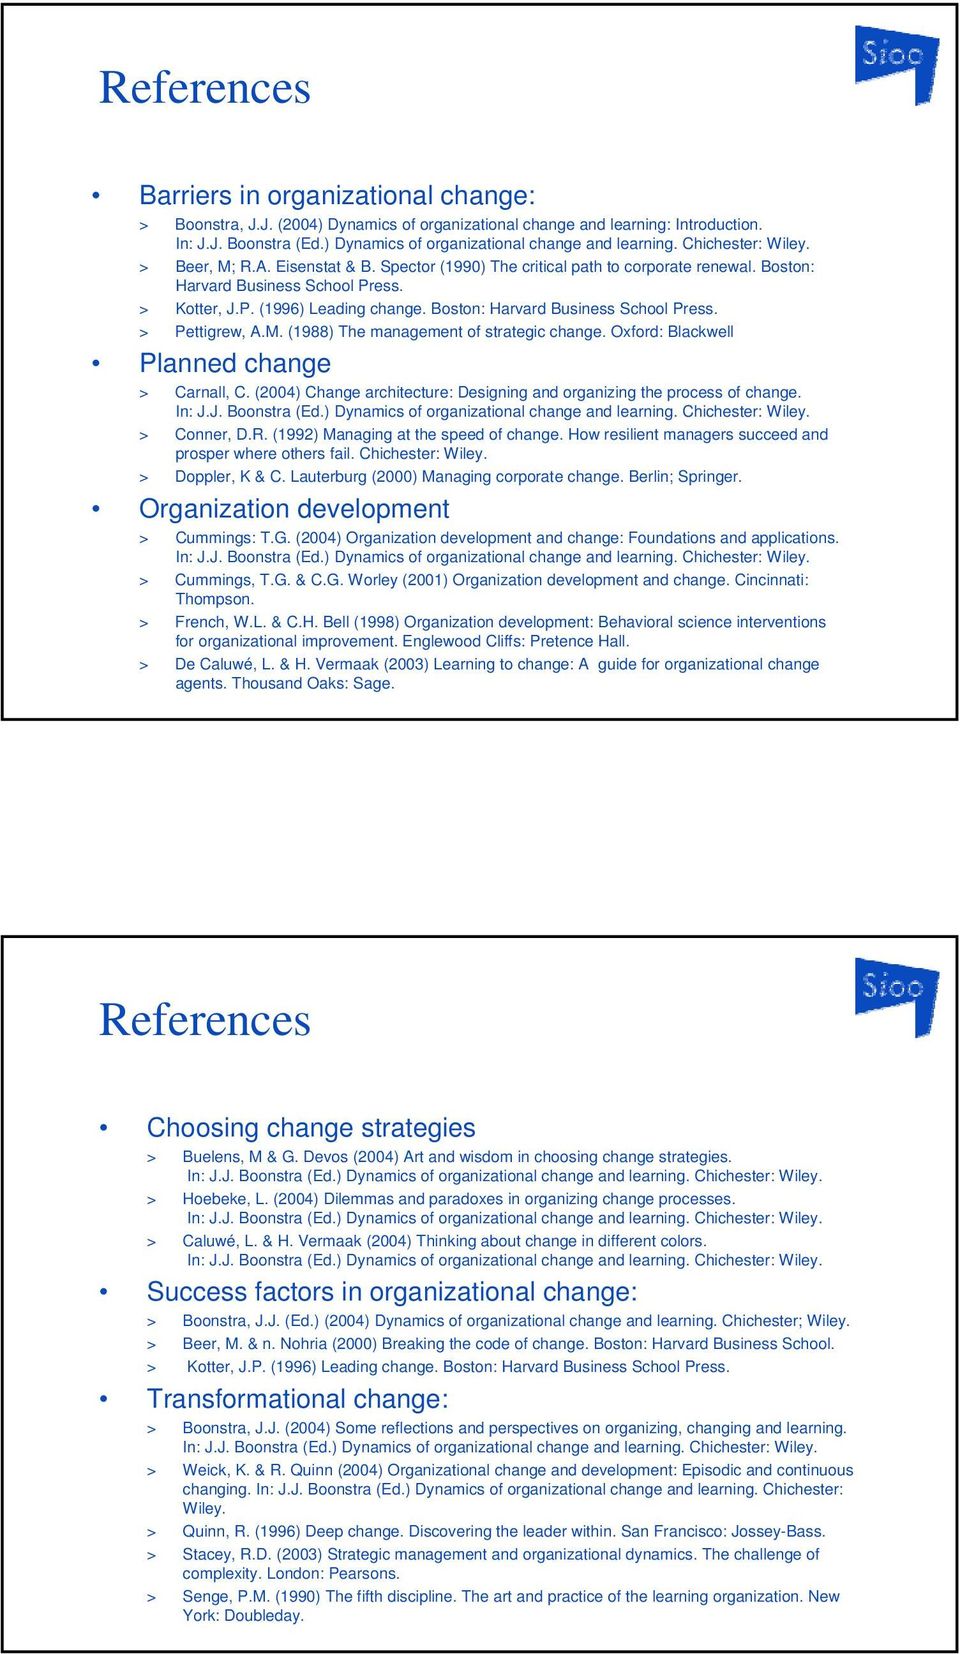 (1988) The management of strategic change. Oxford: Blackwell Planned change > Carnall, C. (2004) Change architecture: Designing and organizing the process of change. > Conner, D.R.